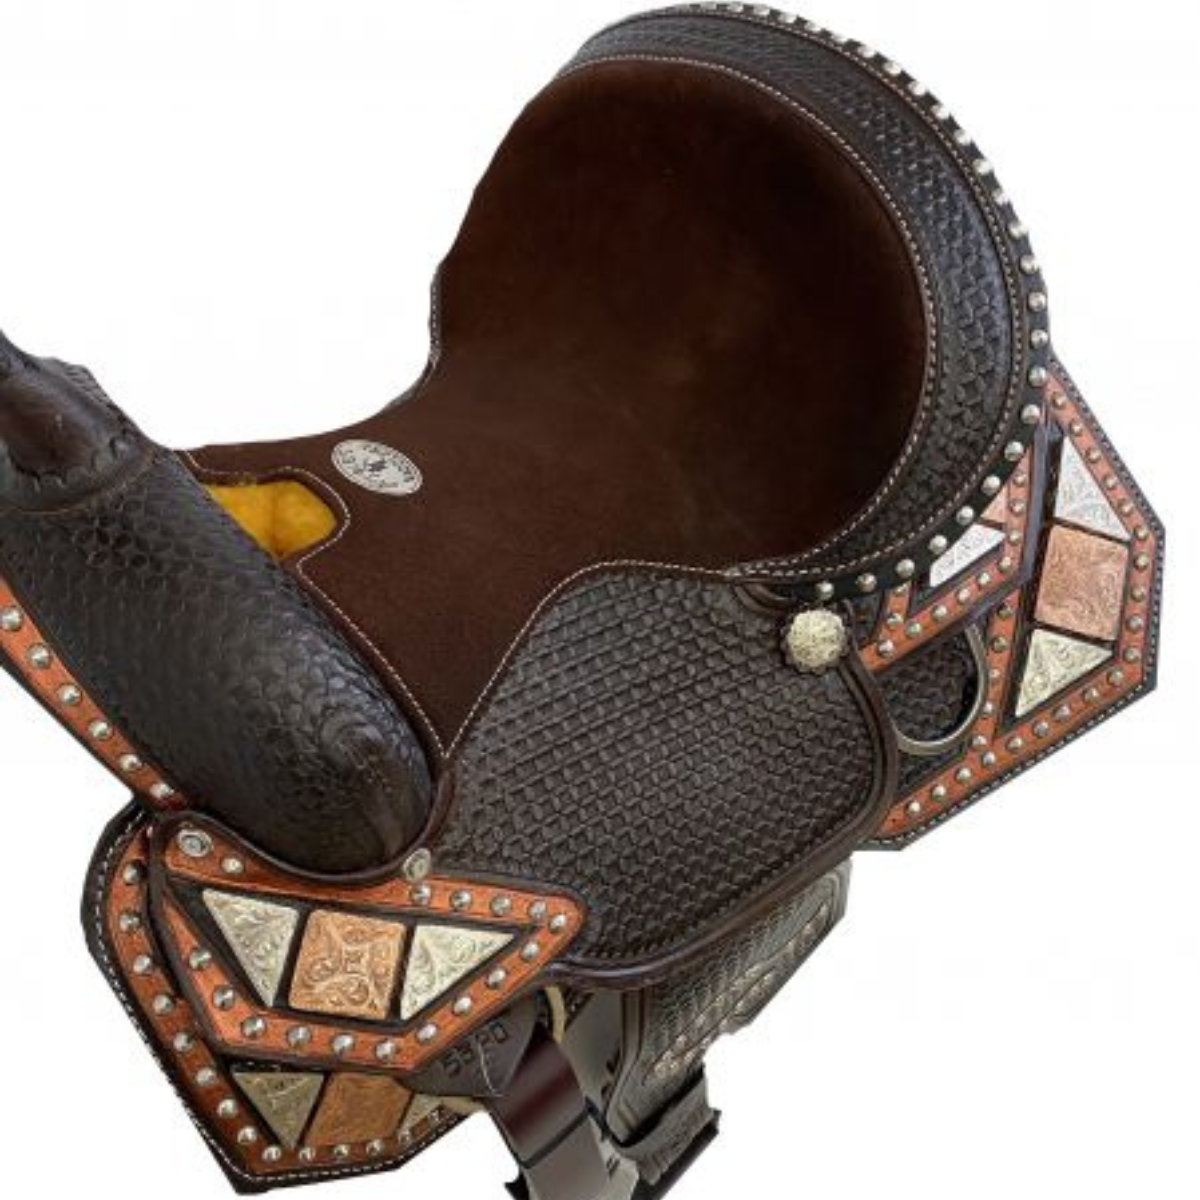 13" DOUBLE T FULLY TOOLED YOUTH / PONY SHOW SADDLE WITH COPPER/SILVER - Double T Saddles